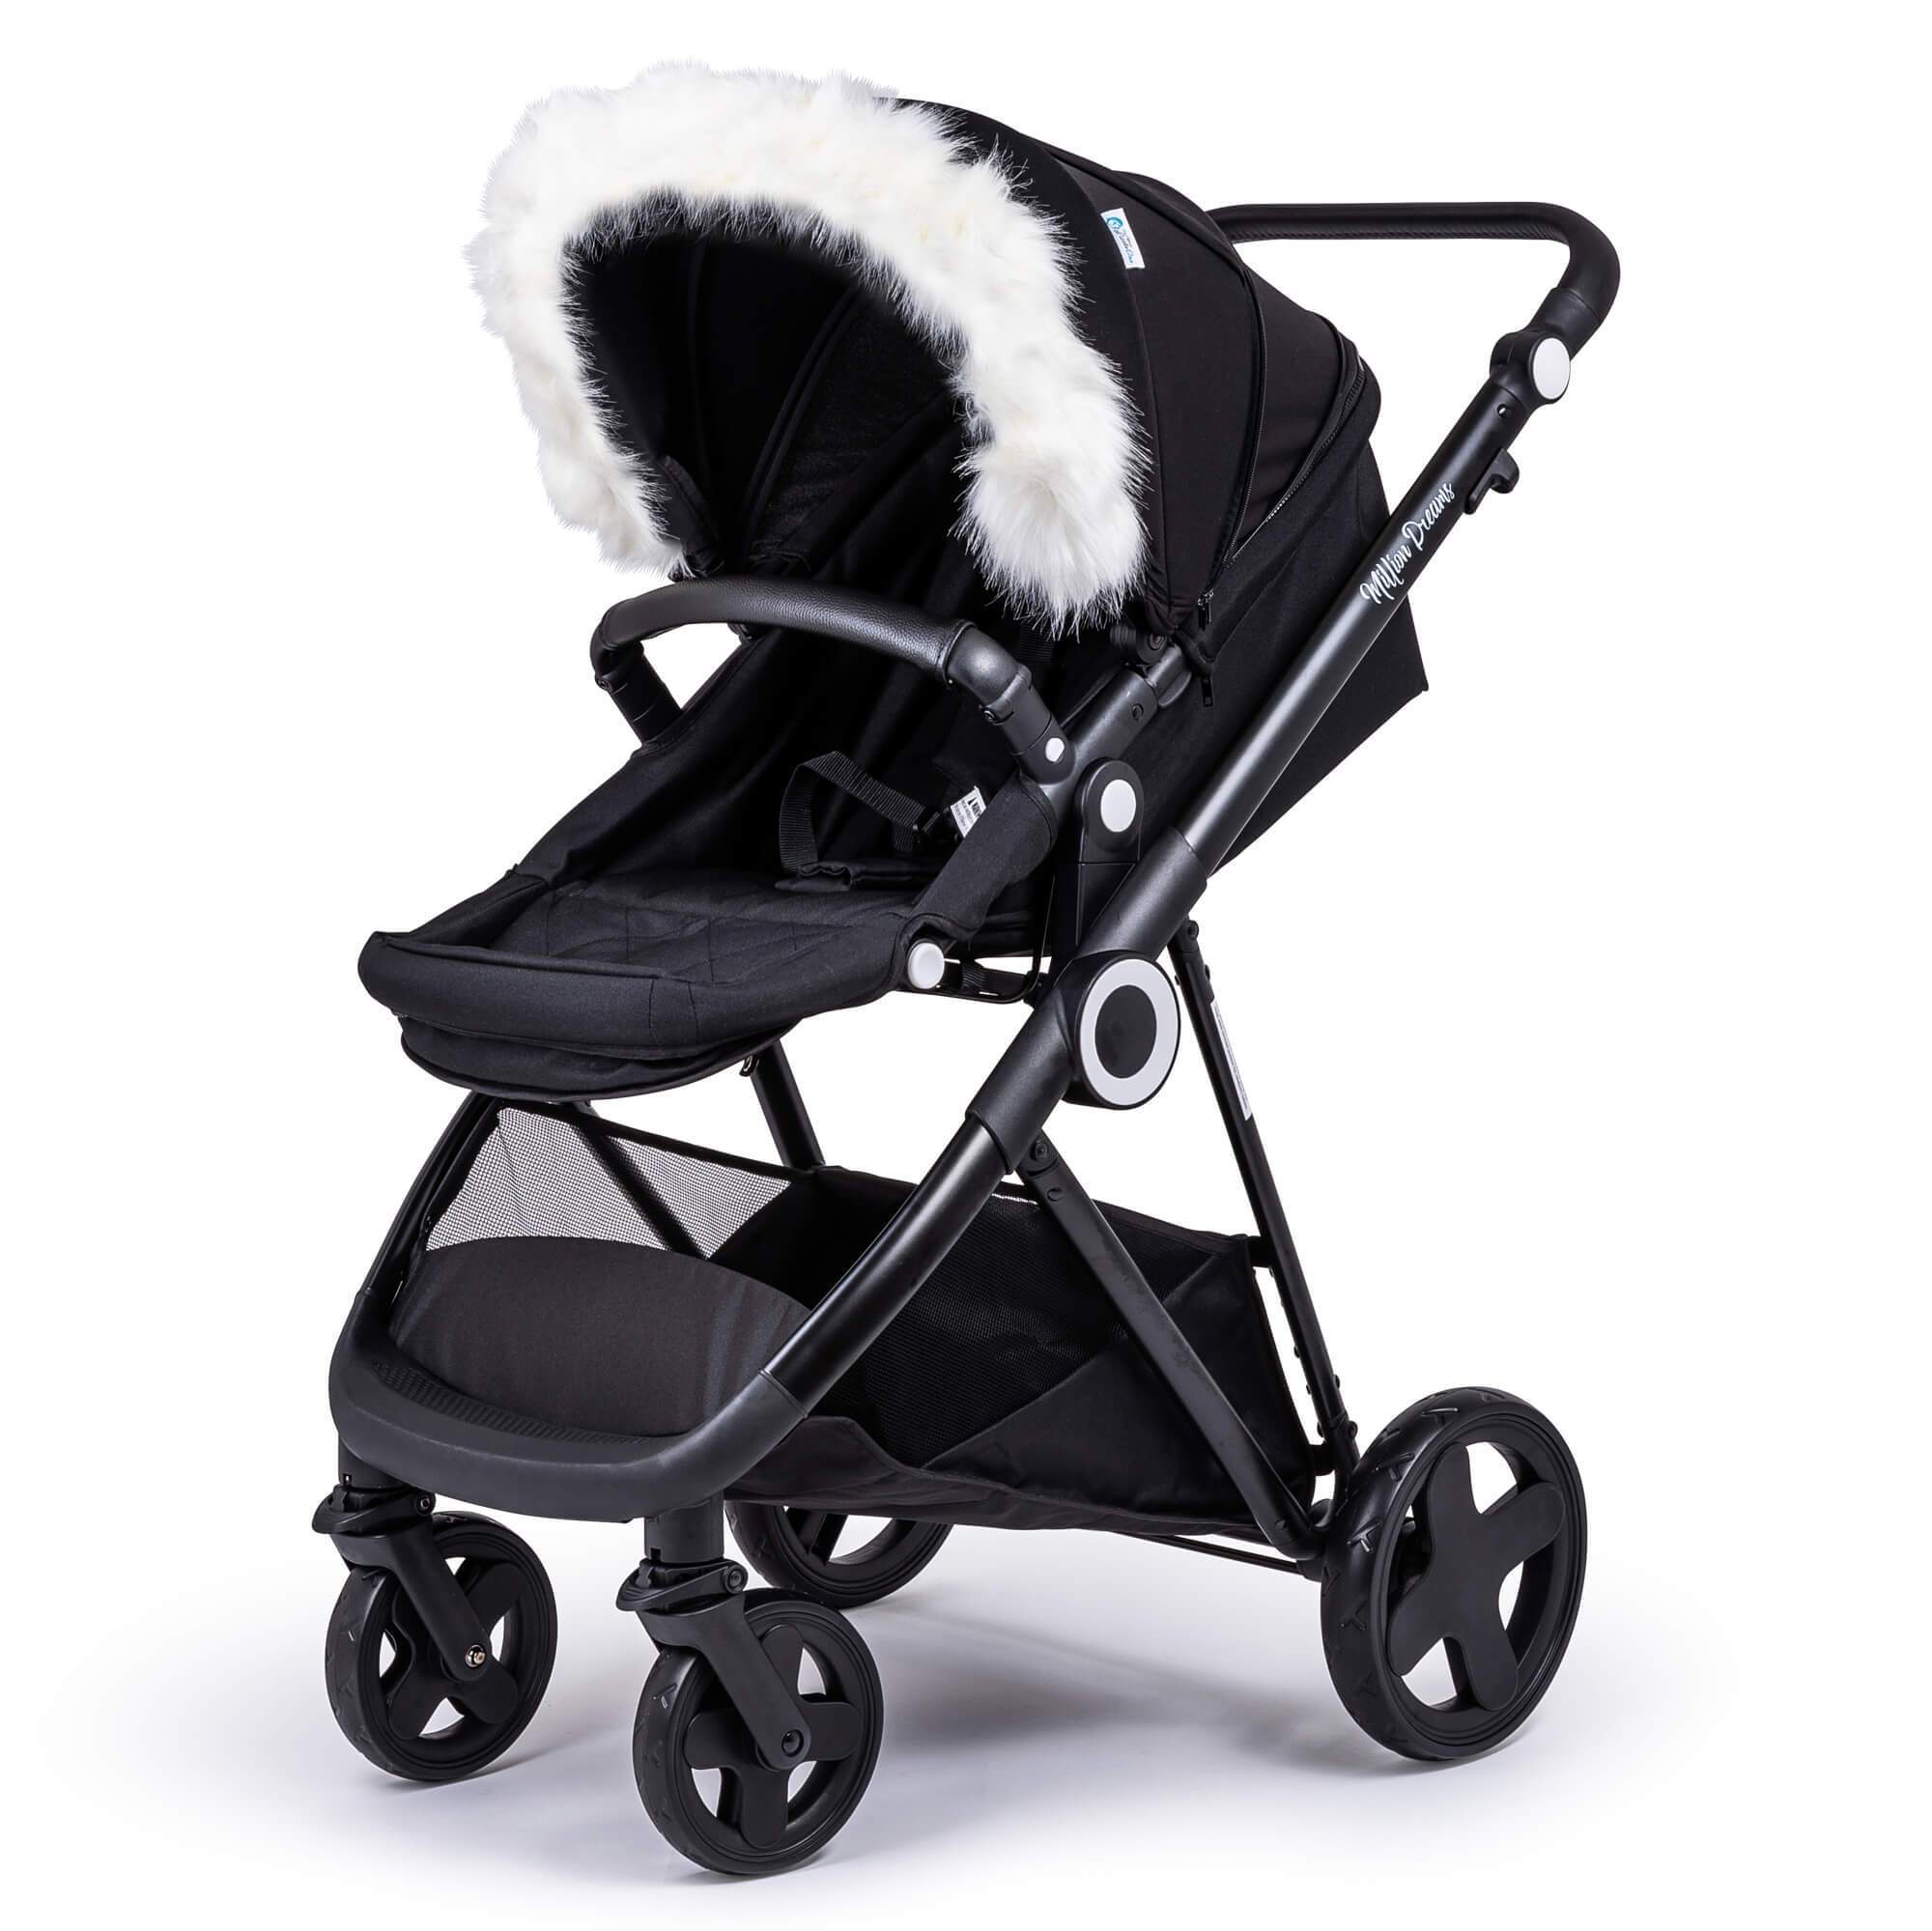 Pram Fur Hood Trim Attachment for Pushchair Compatible with Zeta - White / Fits All Models | For Your Little One